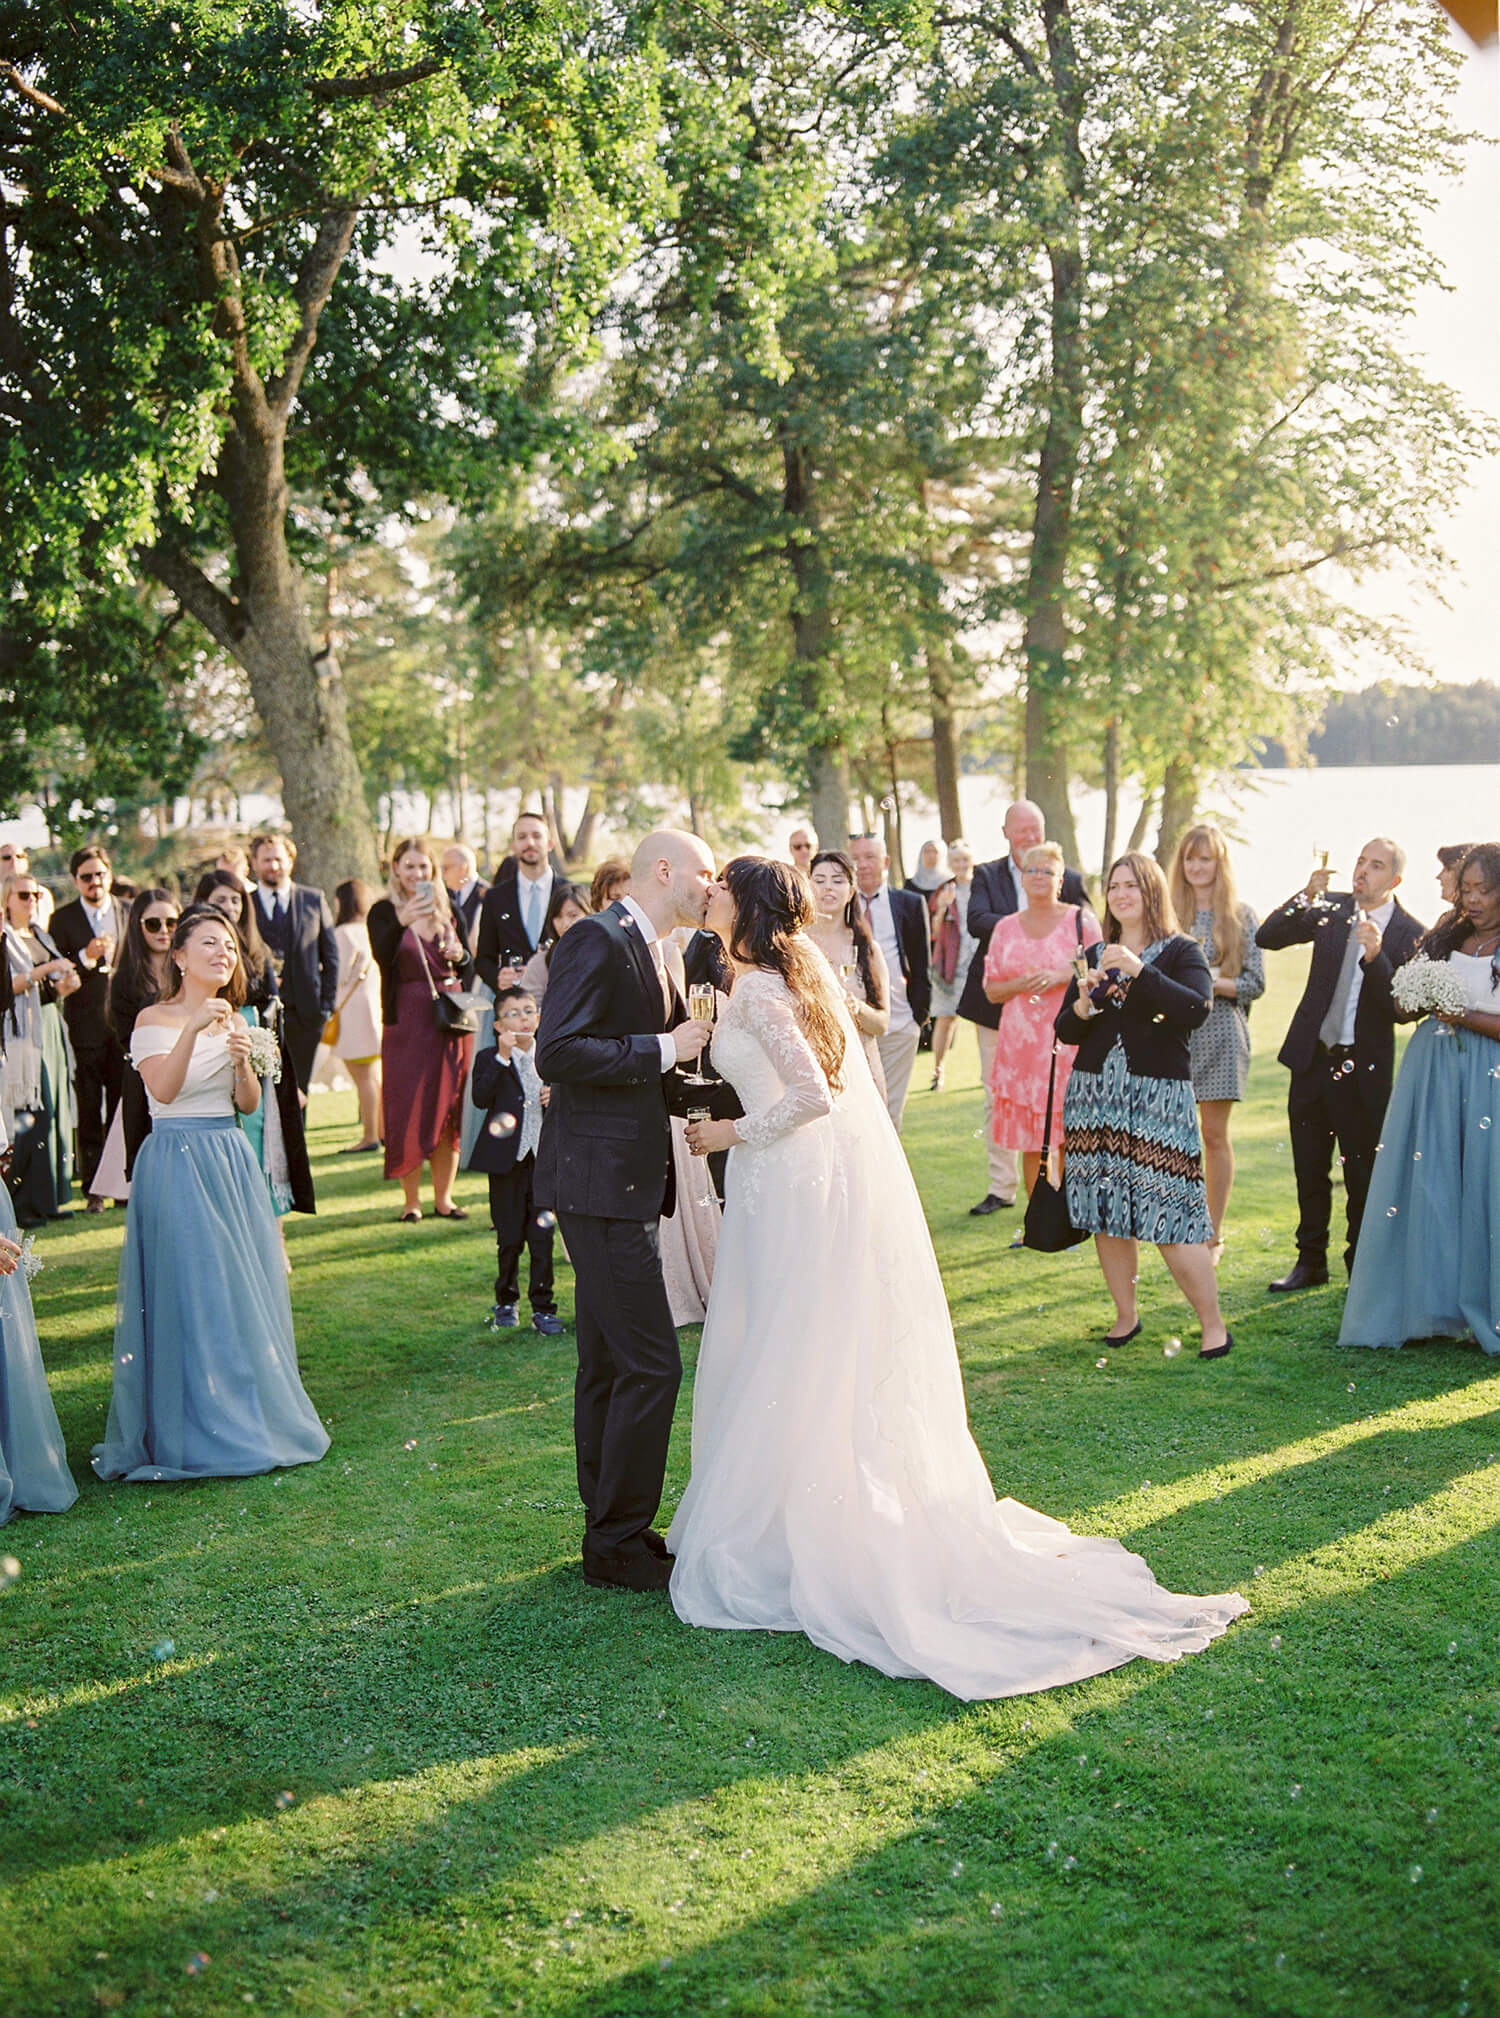 Swedish Wedding Traditions for Your Big Day | 2 Brides Photography